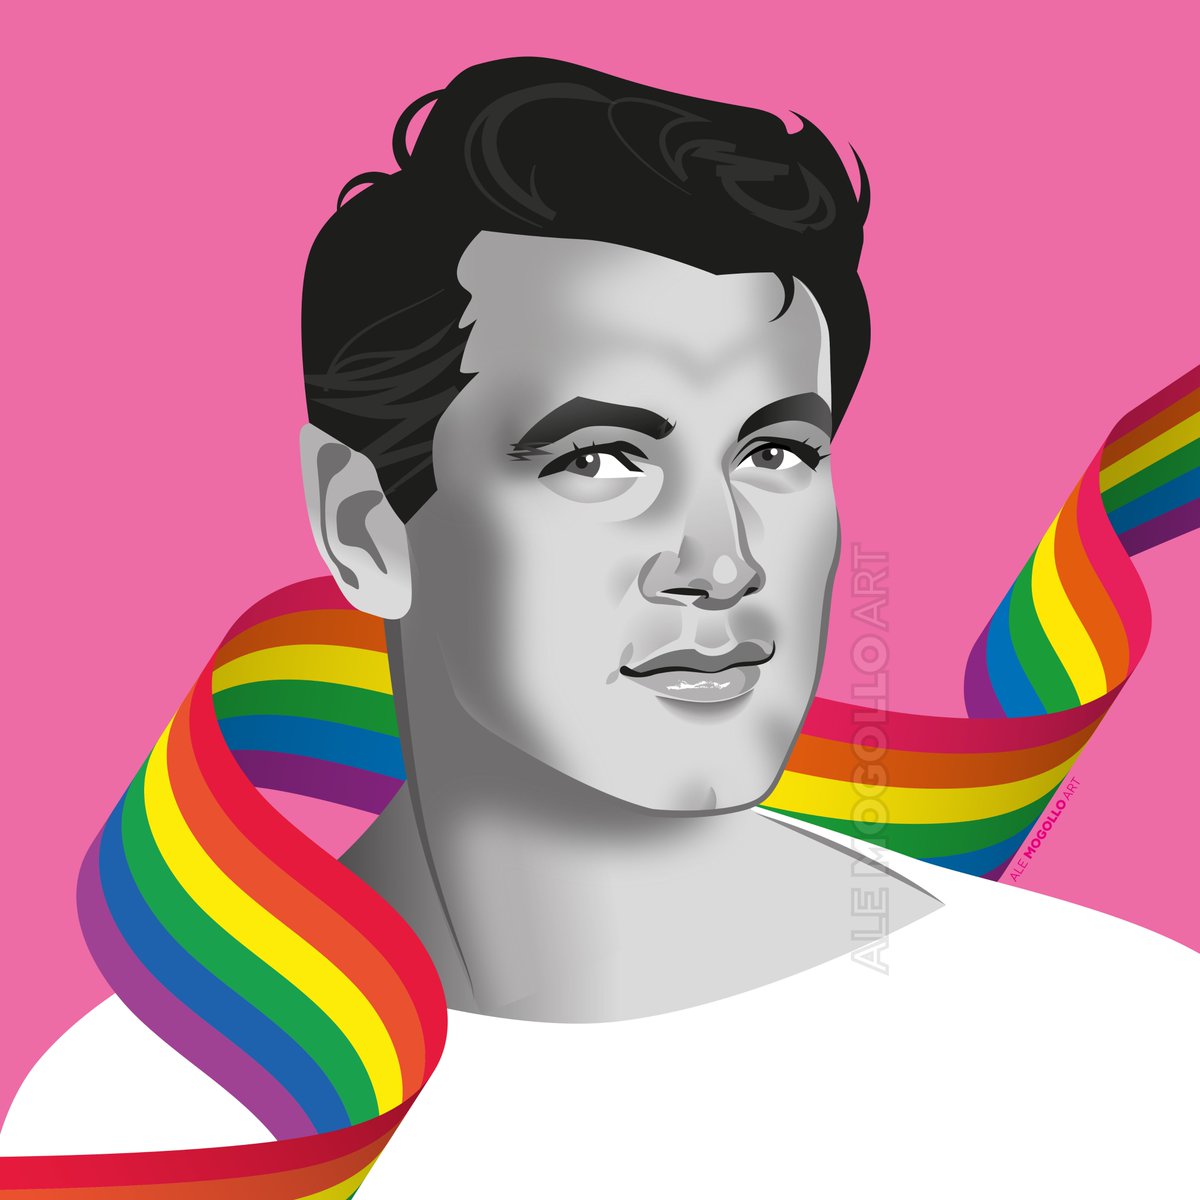 'When Rock Hudson’s ashes were spread from a boat into the pacific, a rainbow appeared'
Remembering the wonderful Rock Hudson on his birthday. Which one of his movies is your favorite?
#rockhudson #pillowtalk #hunk #handsome #star #icon #lgbticon #alejandromogolloart